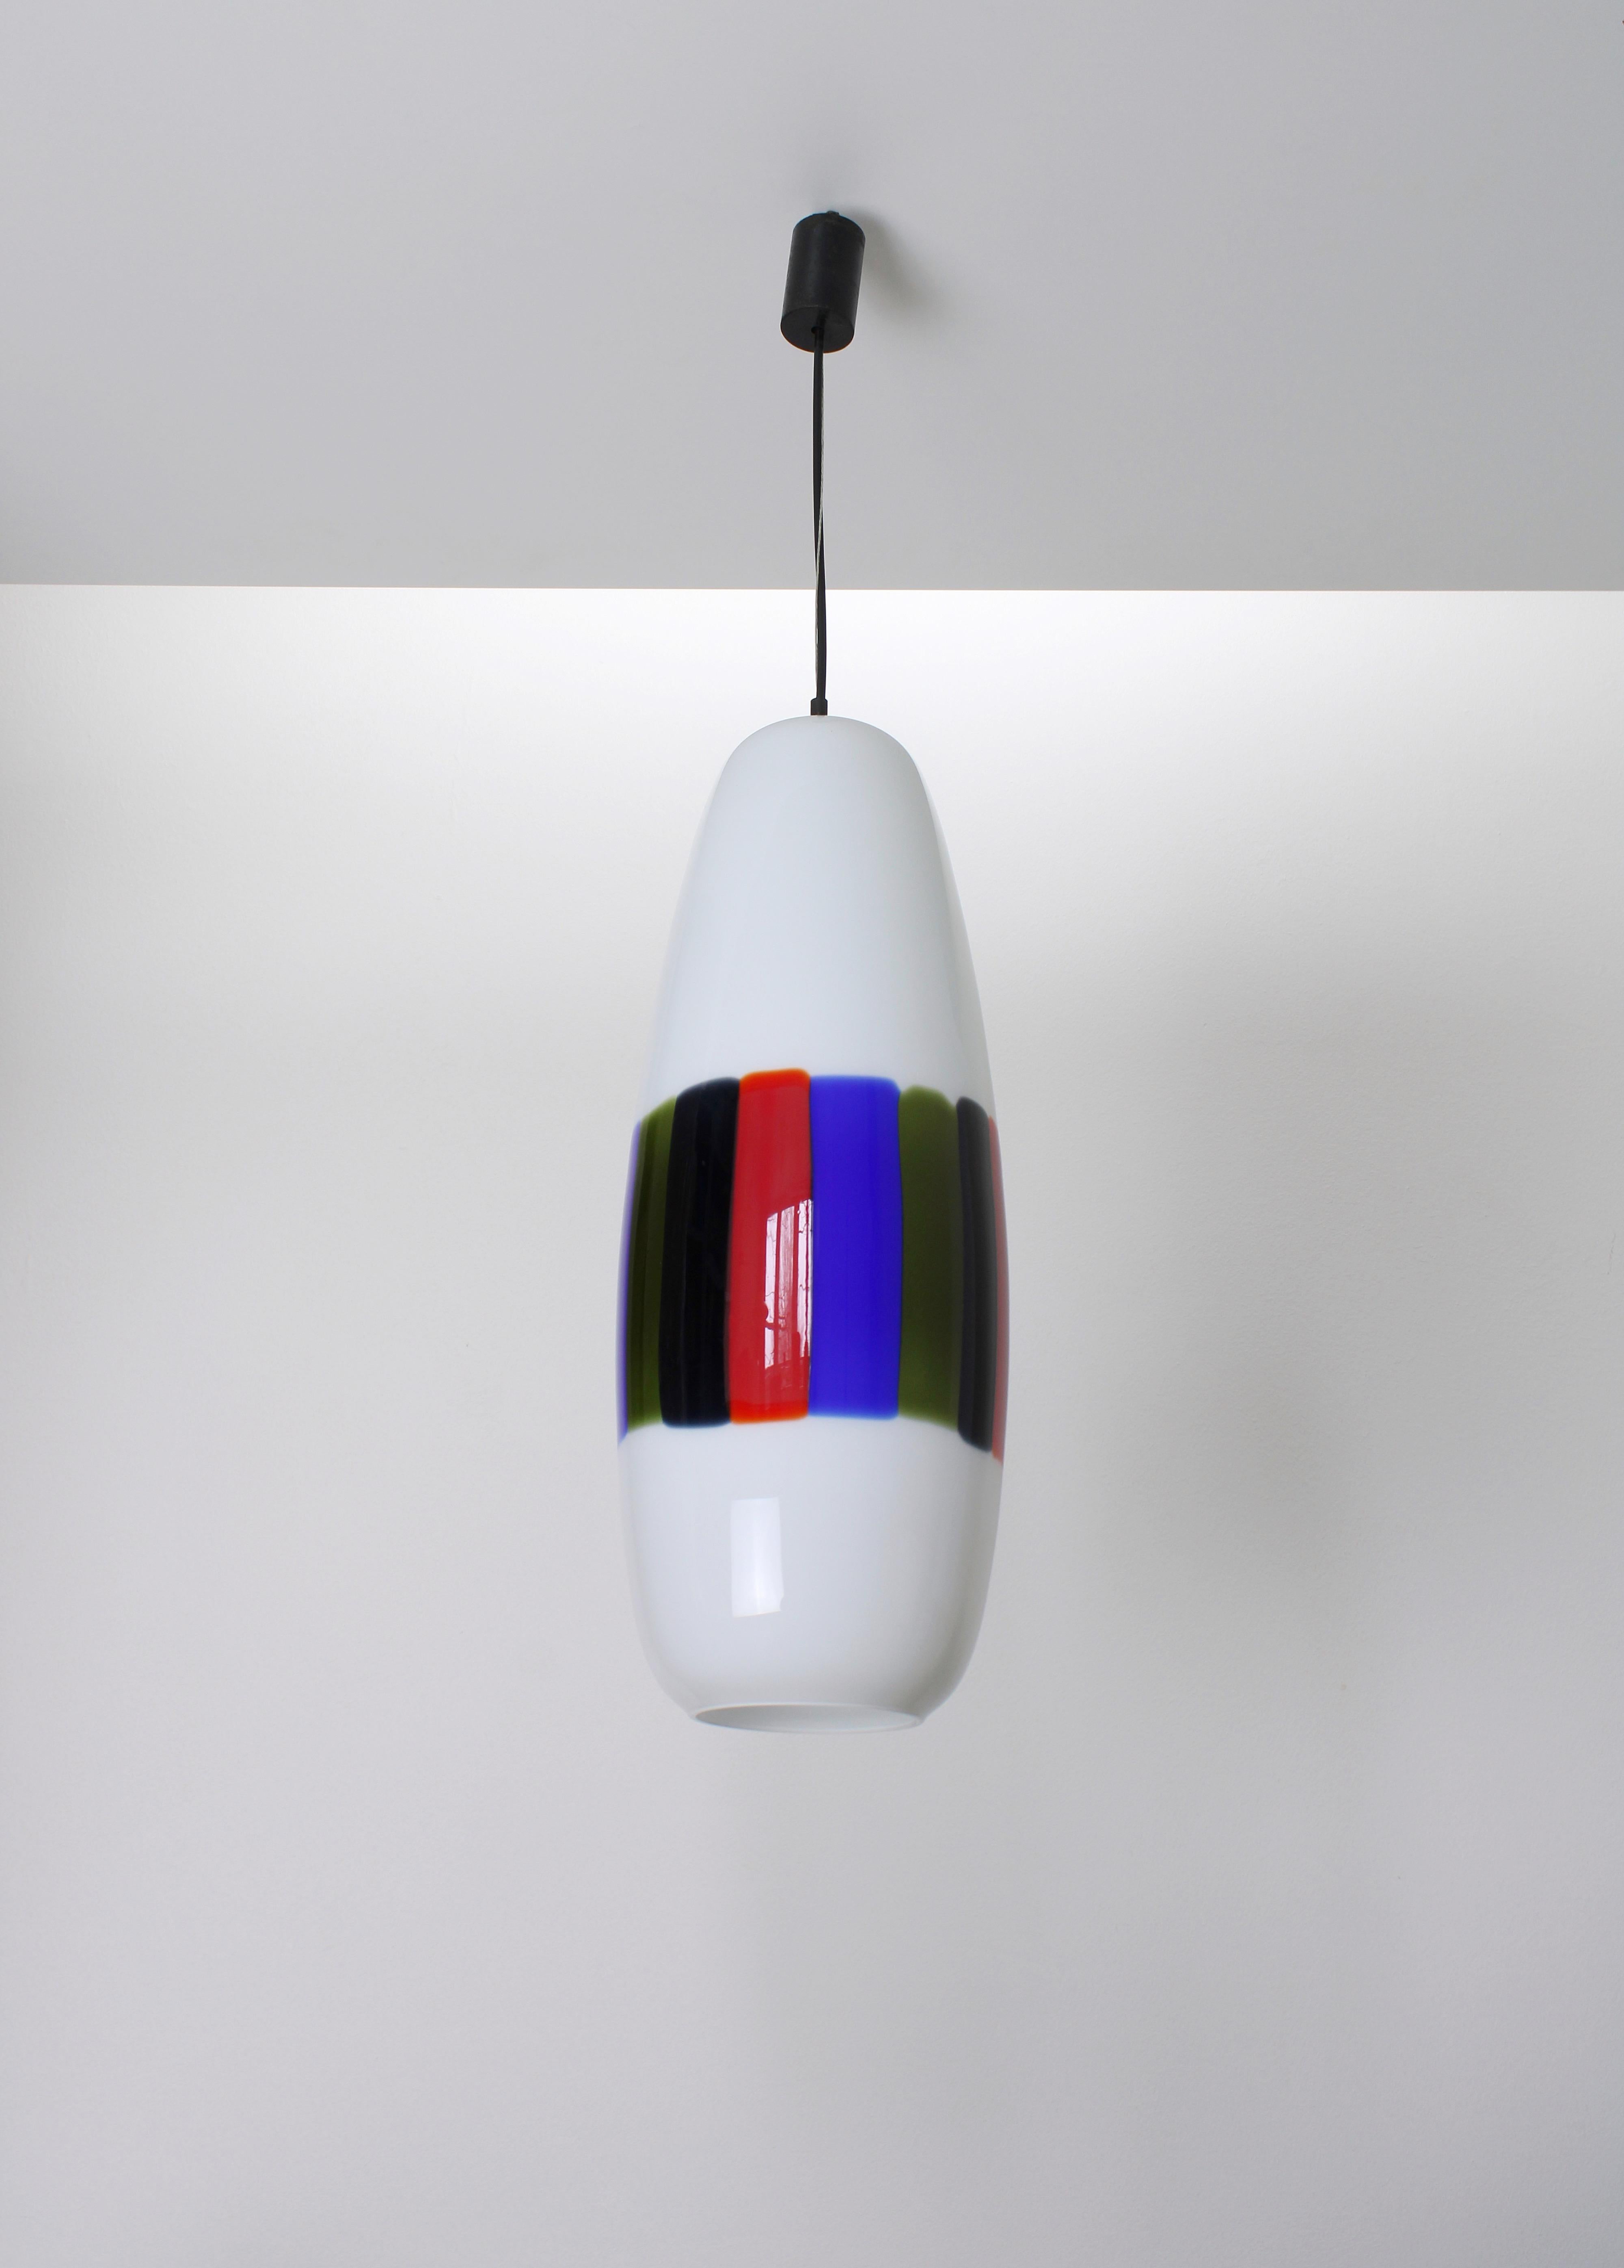 Large model L-143 pendant lamp in Murano glass. Designed by Alessandro Pianon for Vistosi in Murano during the 1960s. Hand-made round shaped cylinder in white glass with green, blue, red and black stripes. This lamp is in very good condition without